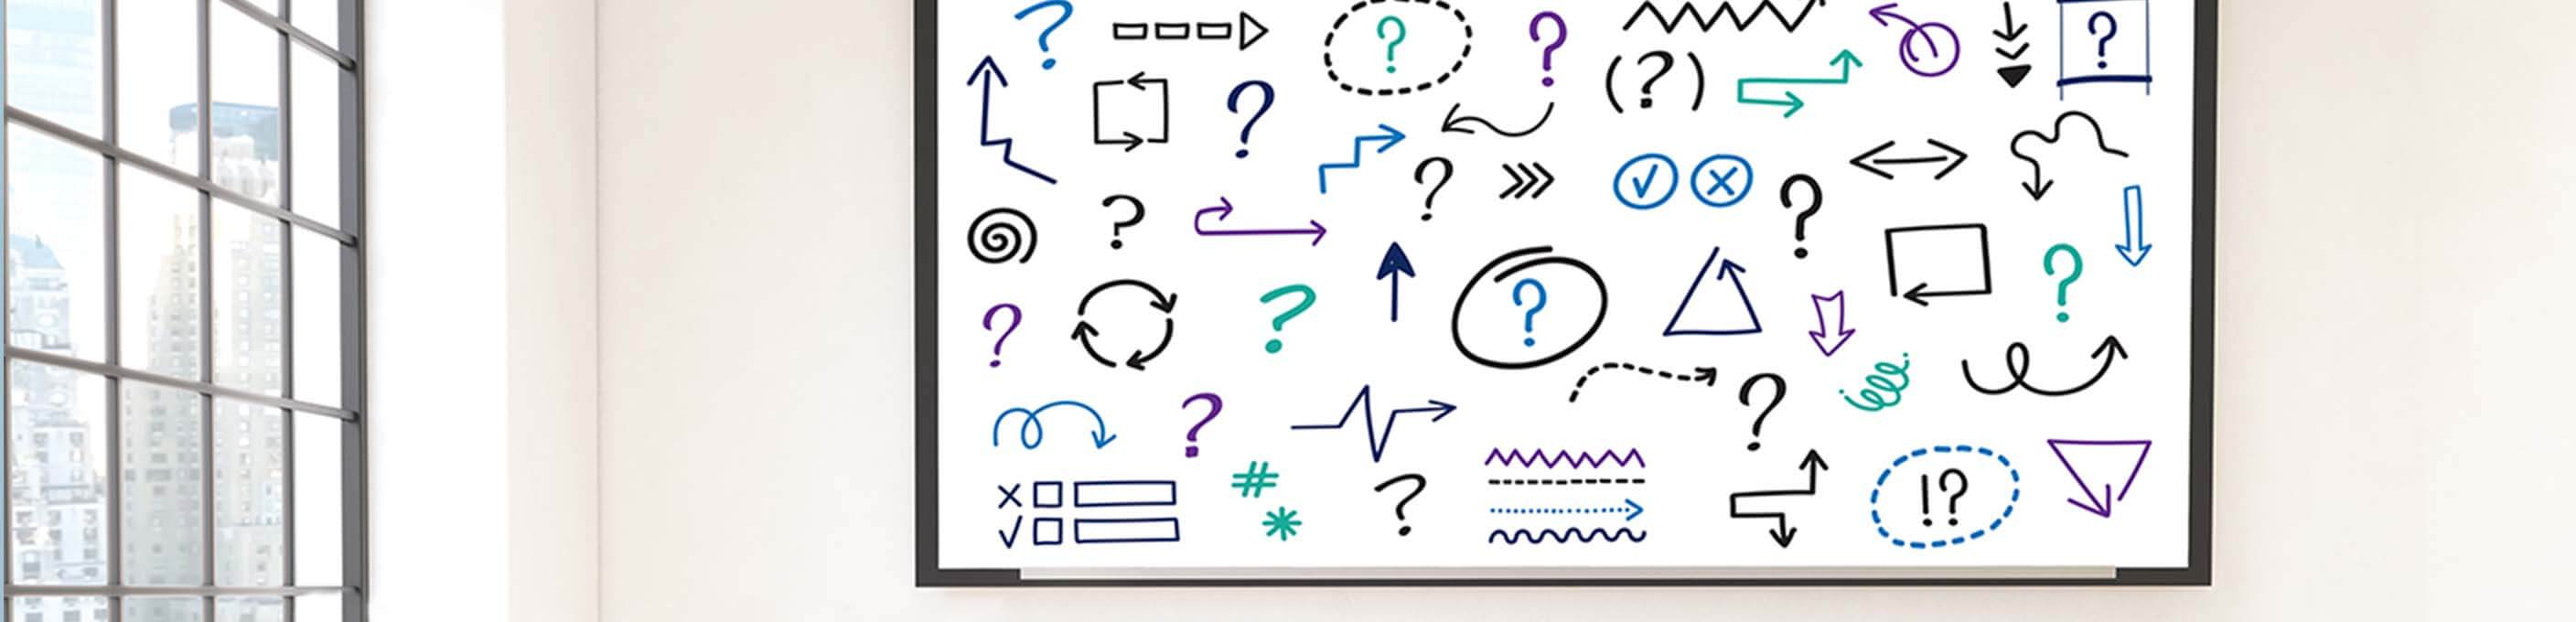 Whiteboard with question marks and symbols written in marker